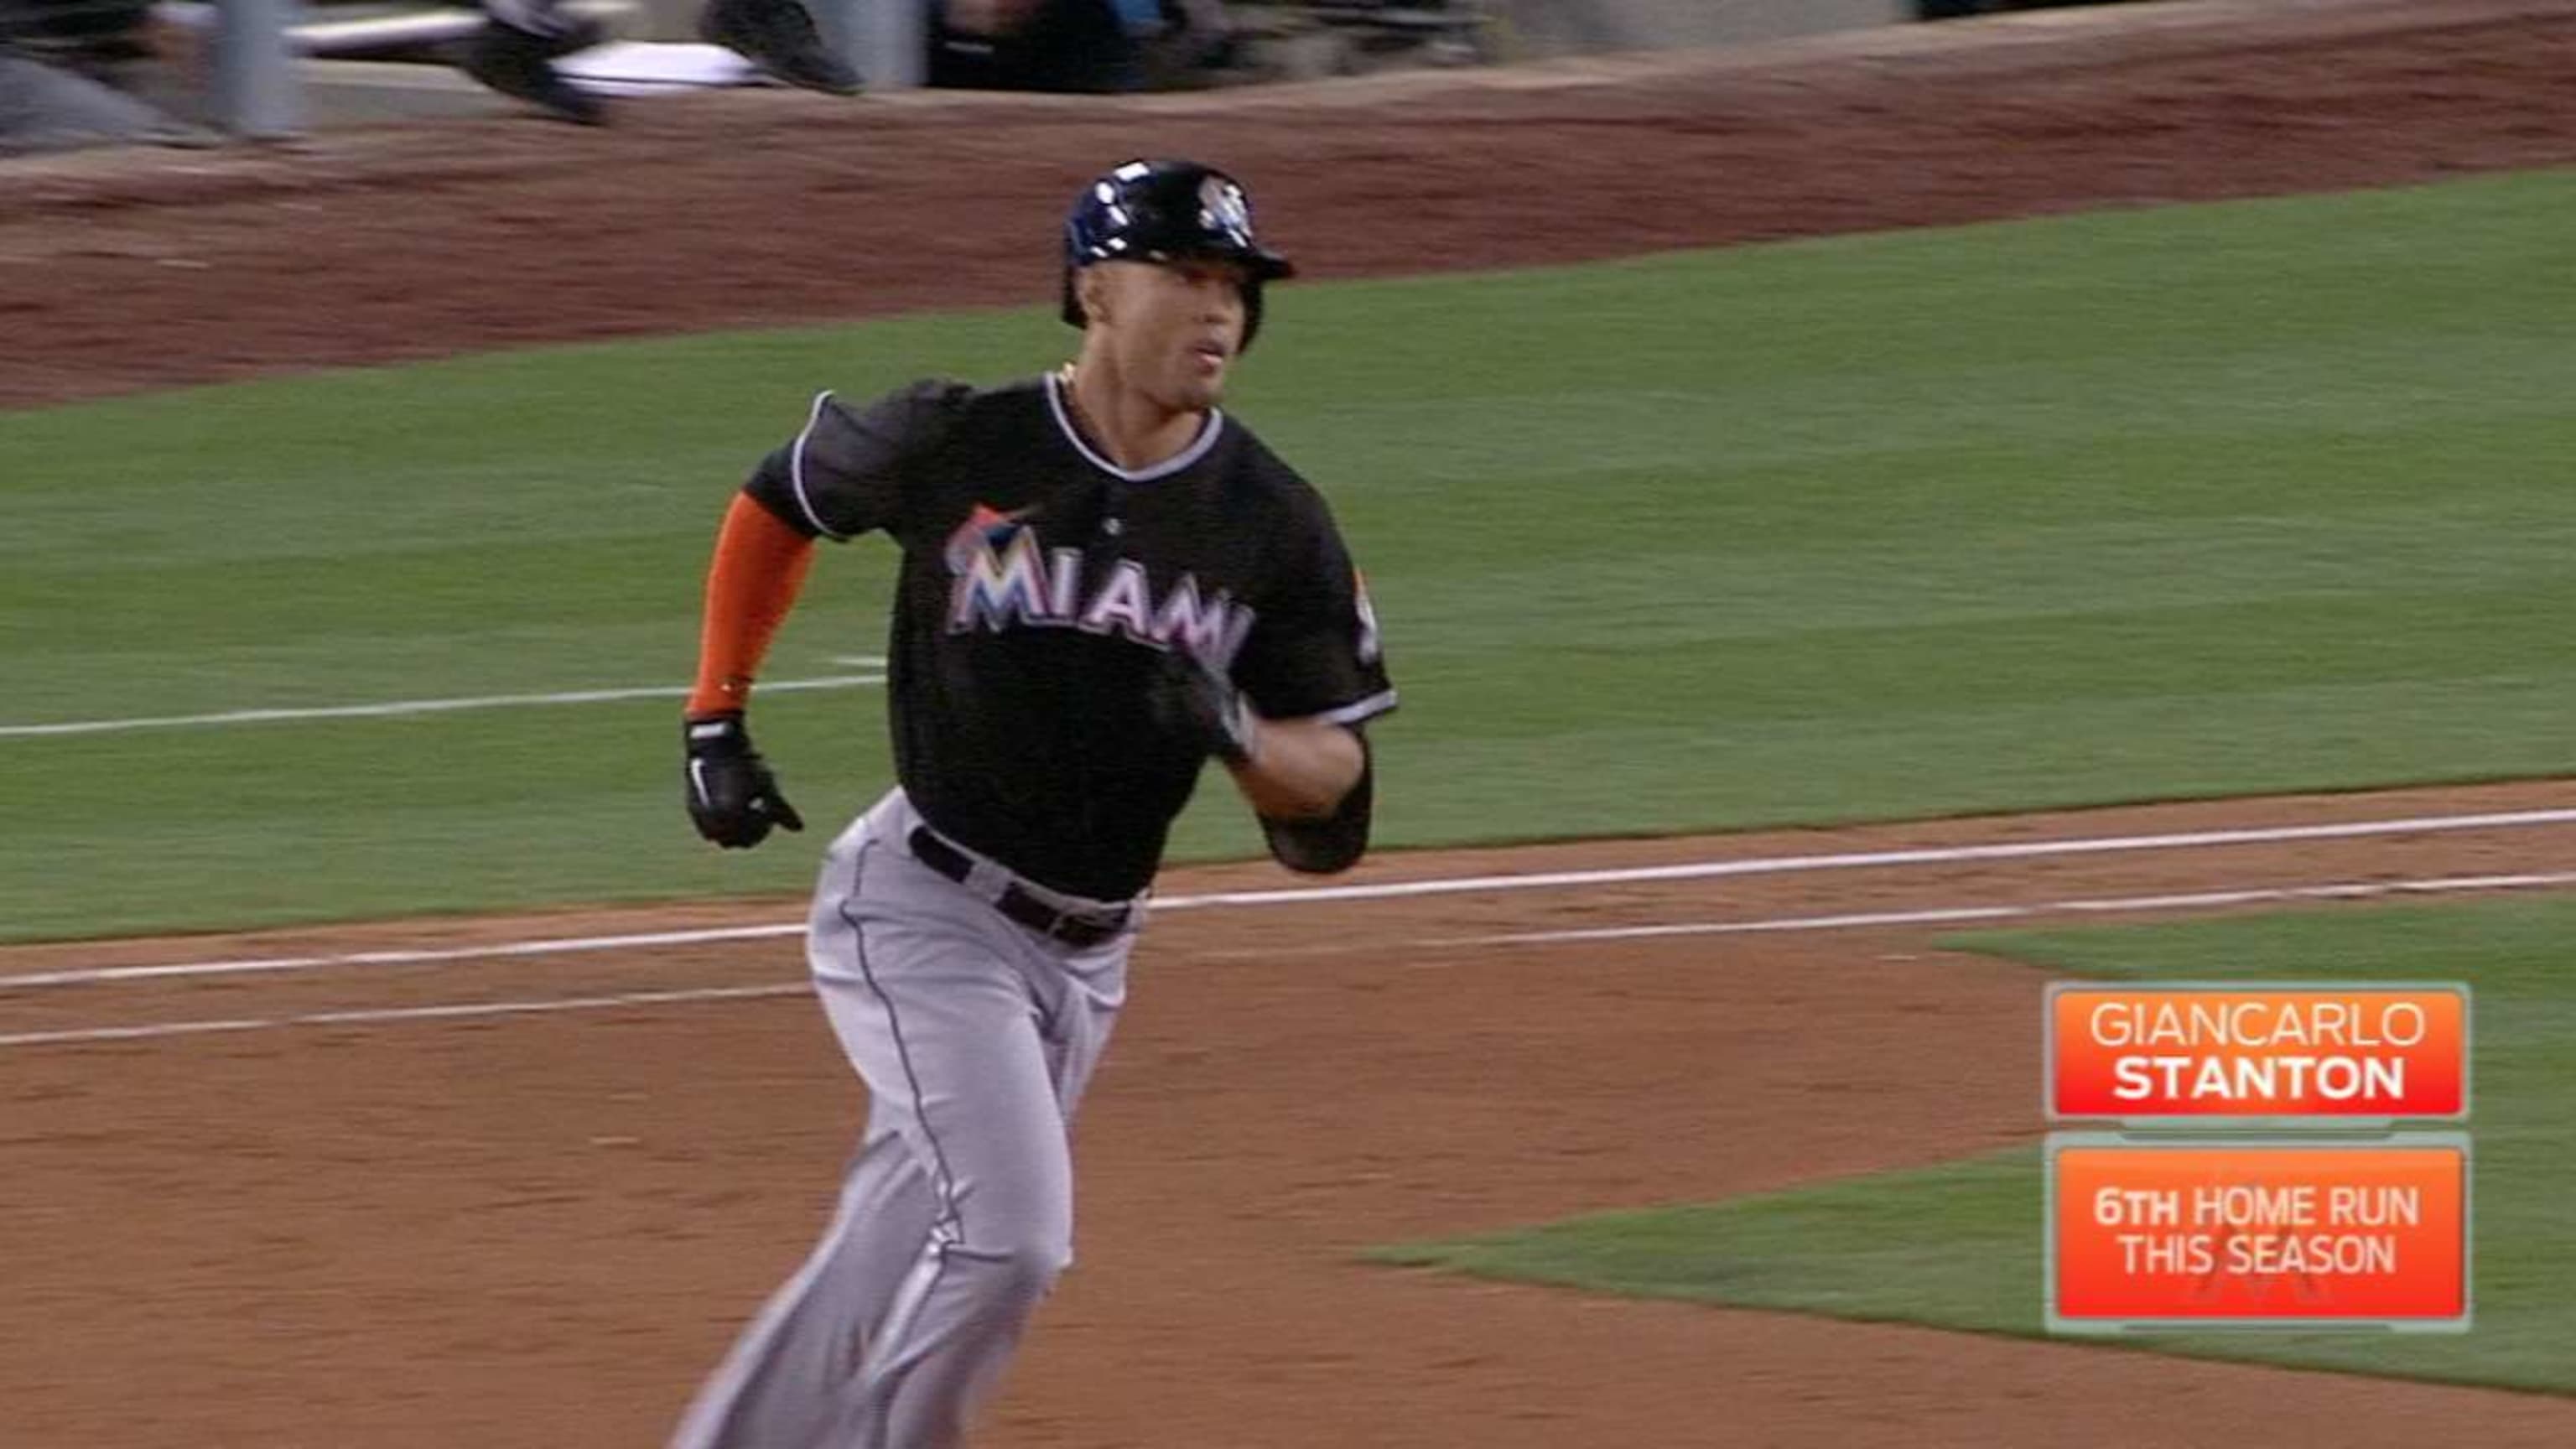 Matt on X: Time for the other big boy: Giancarlo Stanton